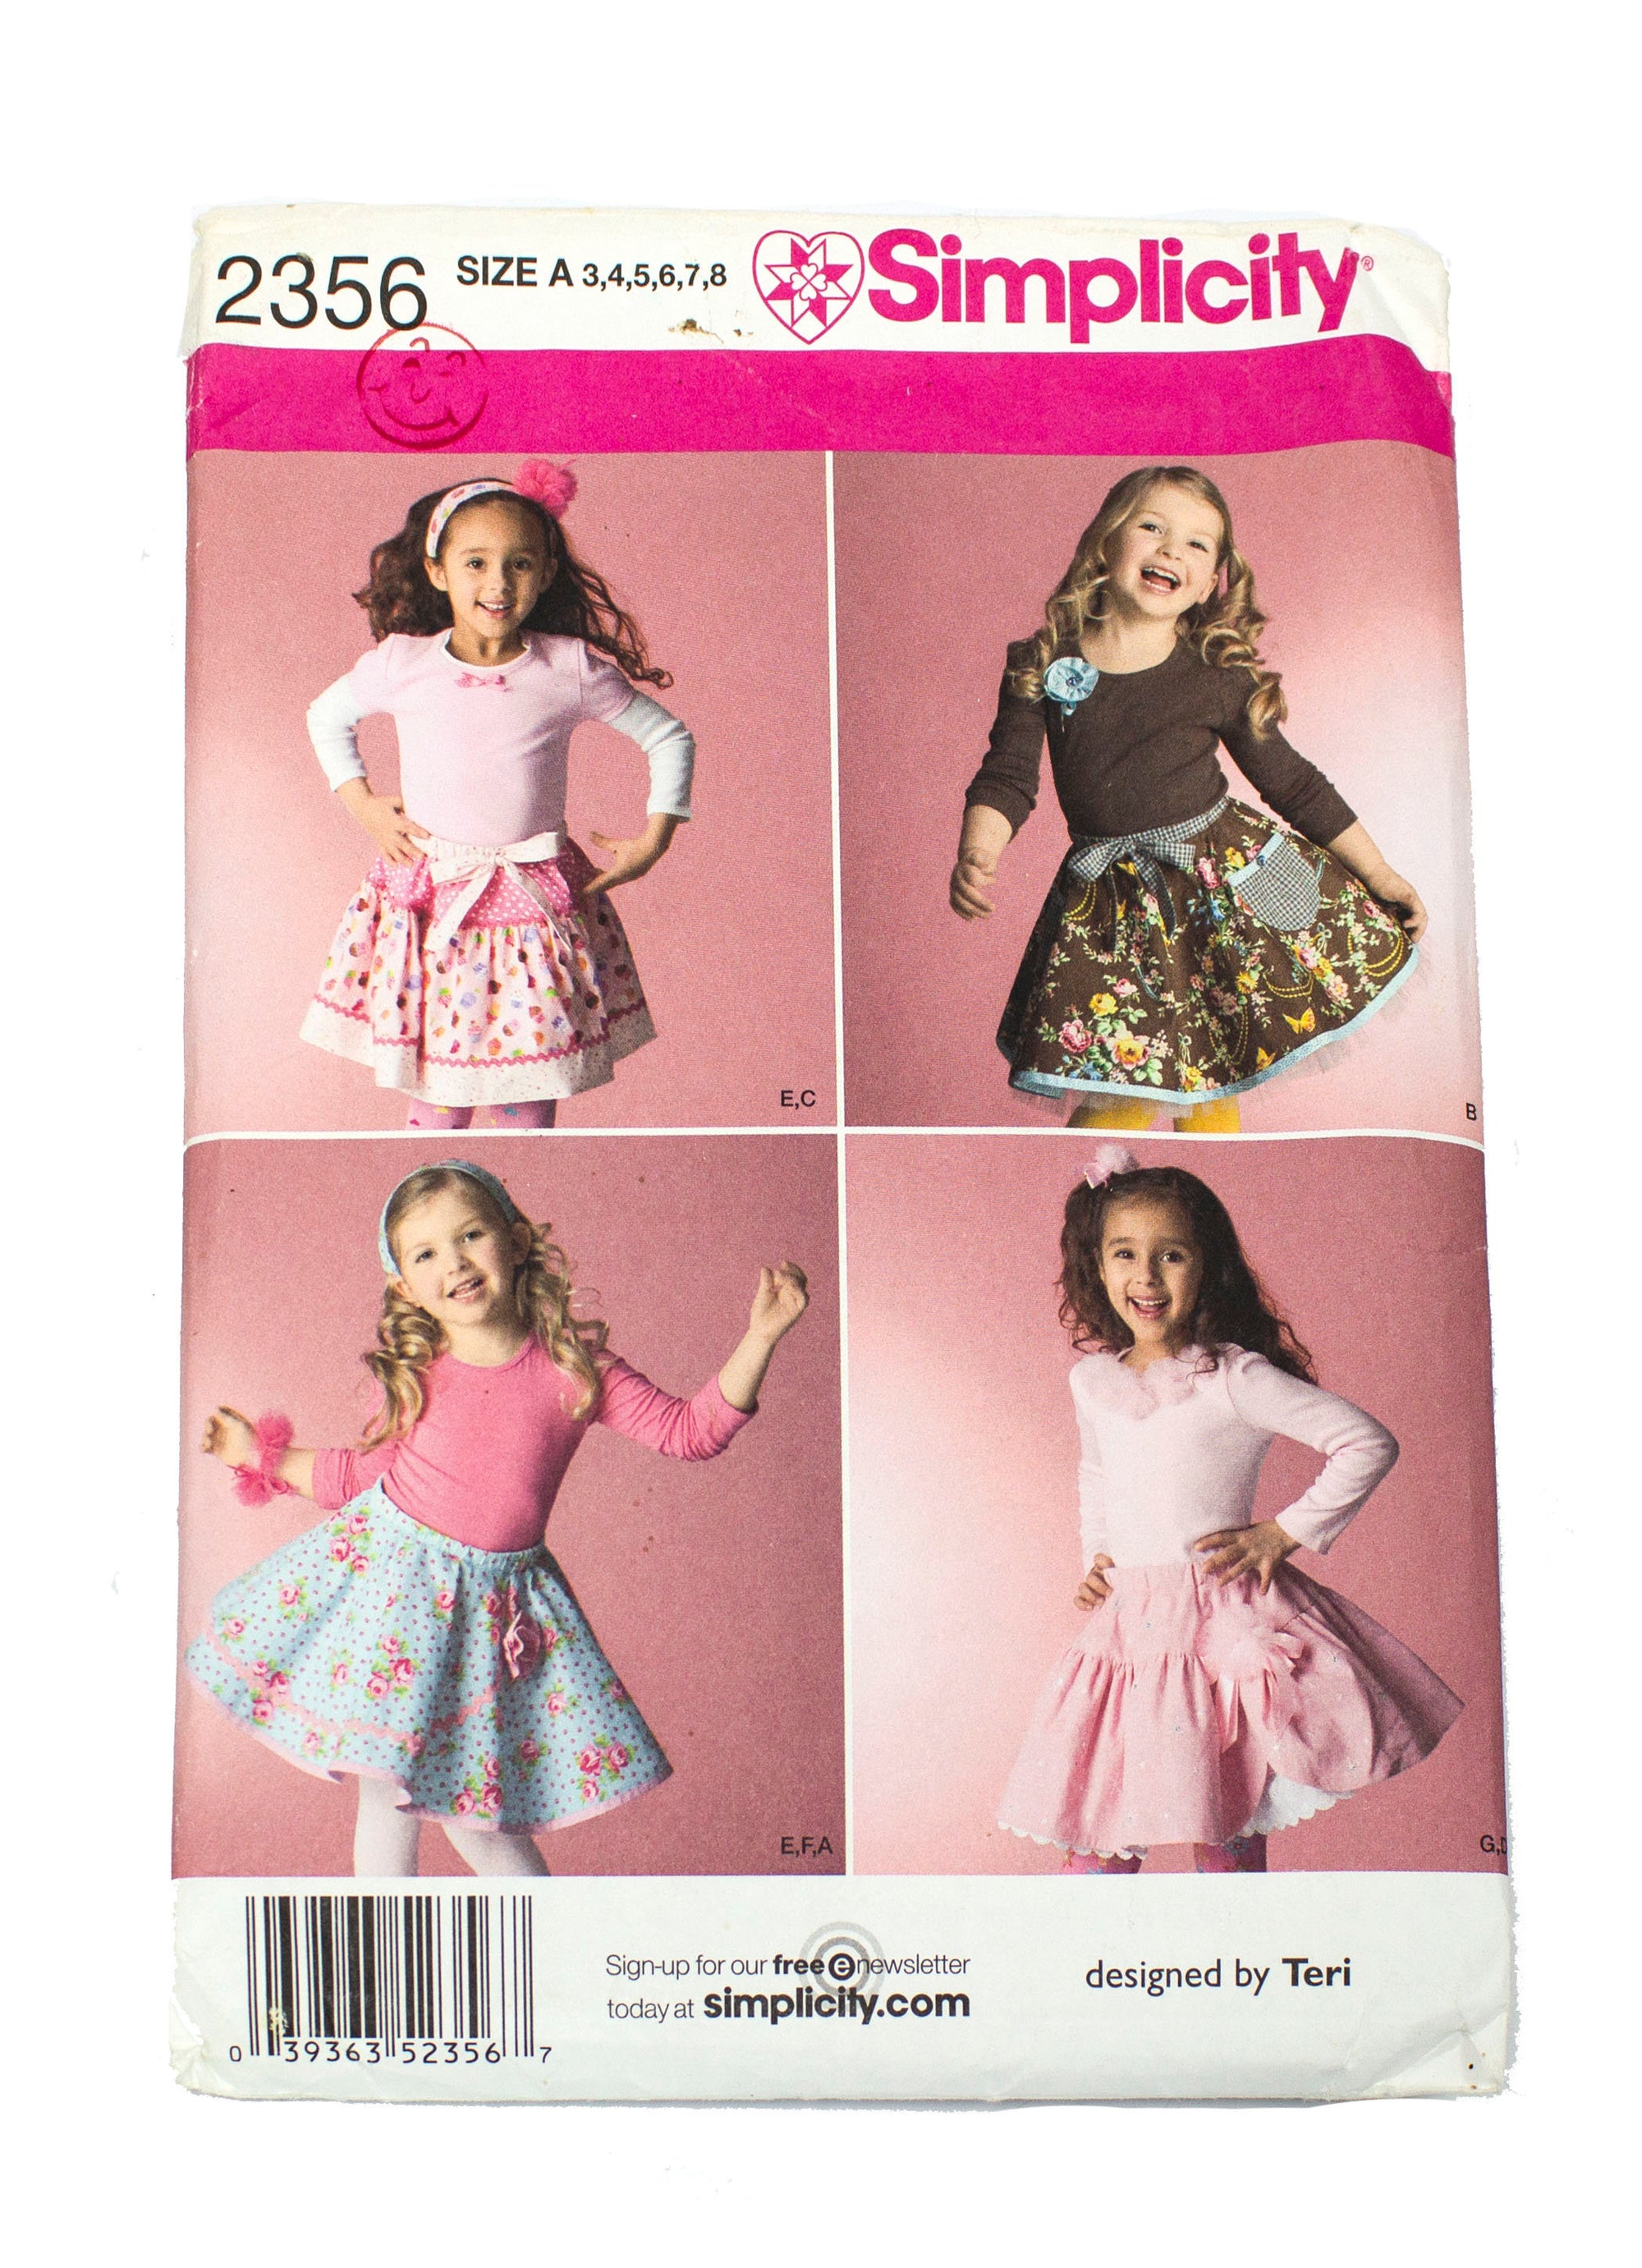 Simplicity 2356 Children's Skirts, Slips and Accessories - Sizes 3 - 8